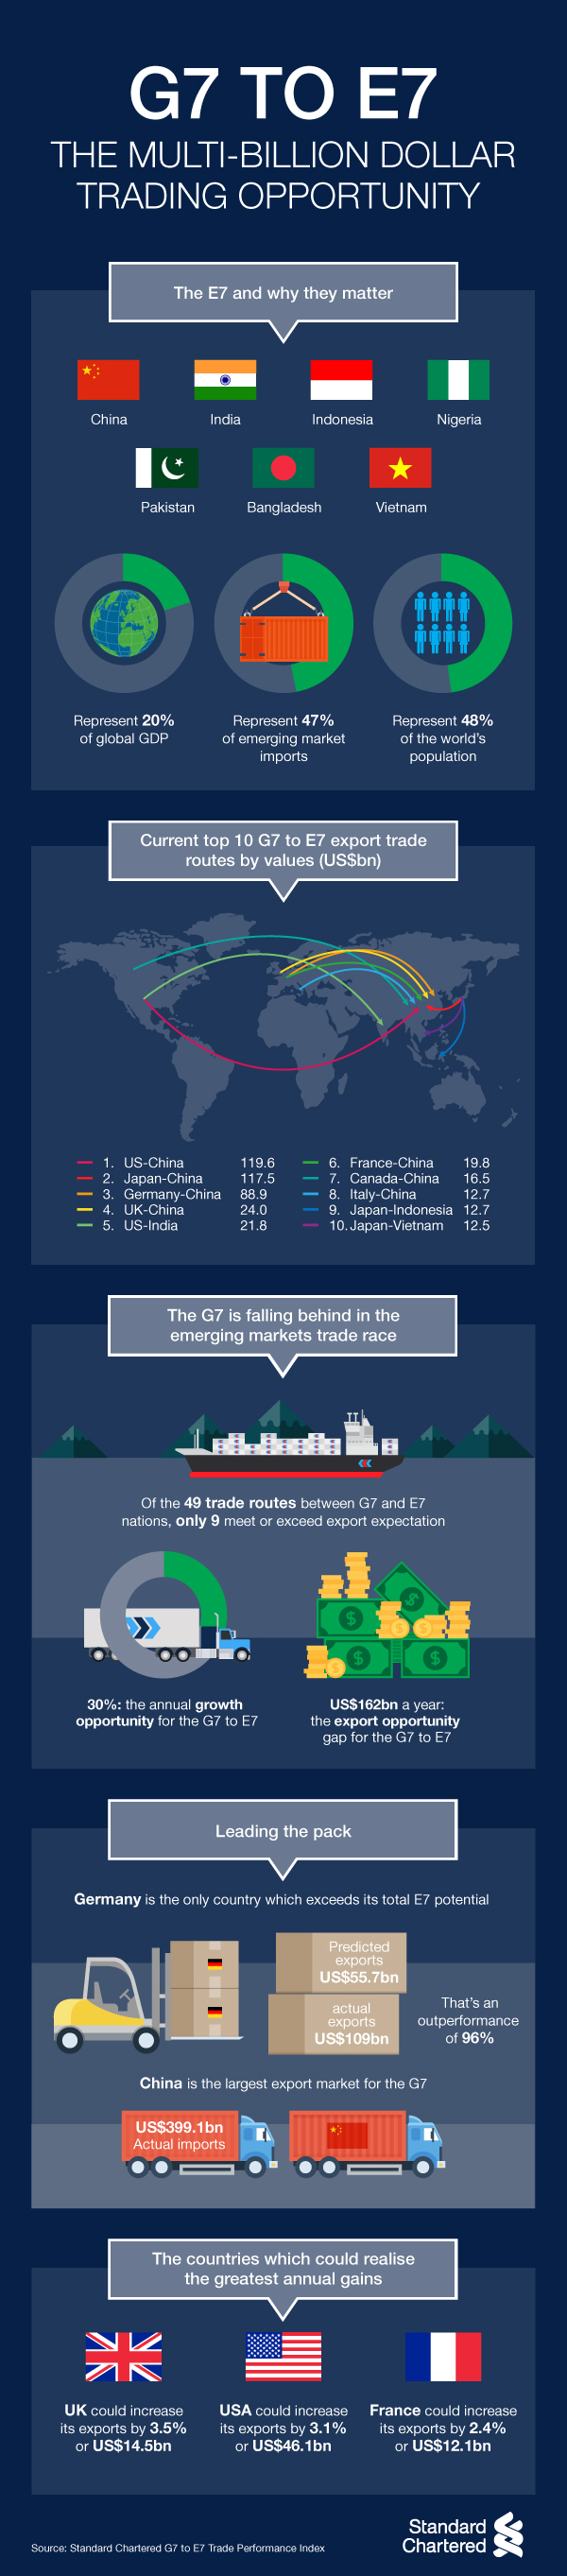 Infographic: G7 to E7 The multi-billion dollar trading opportunity